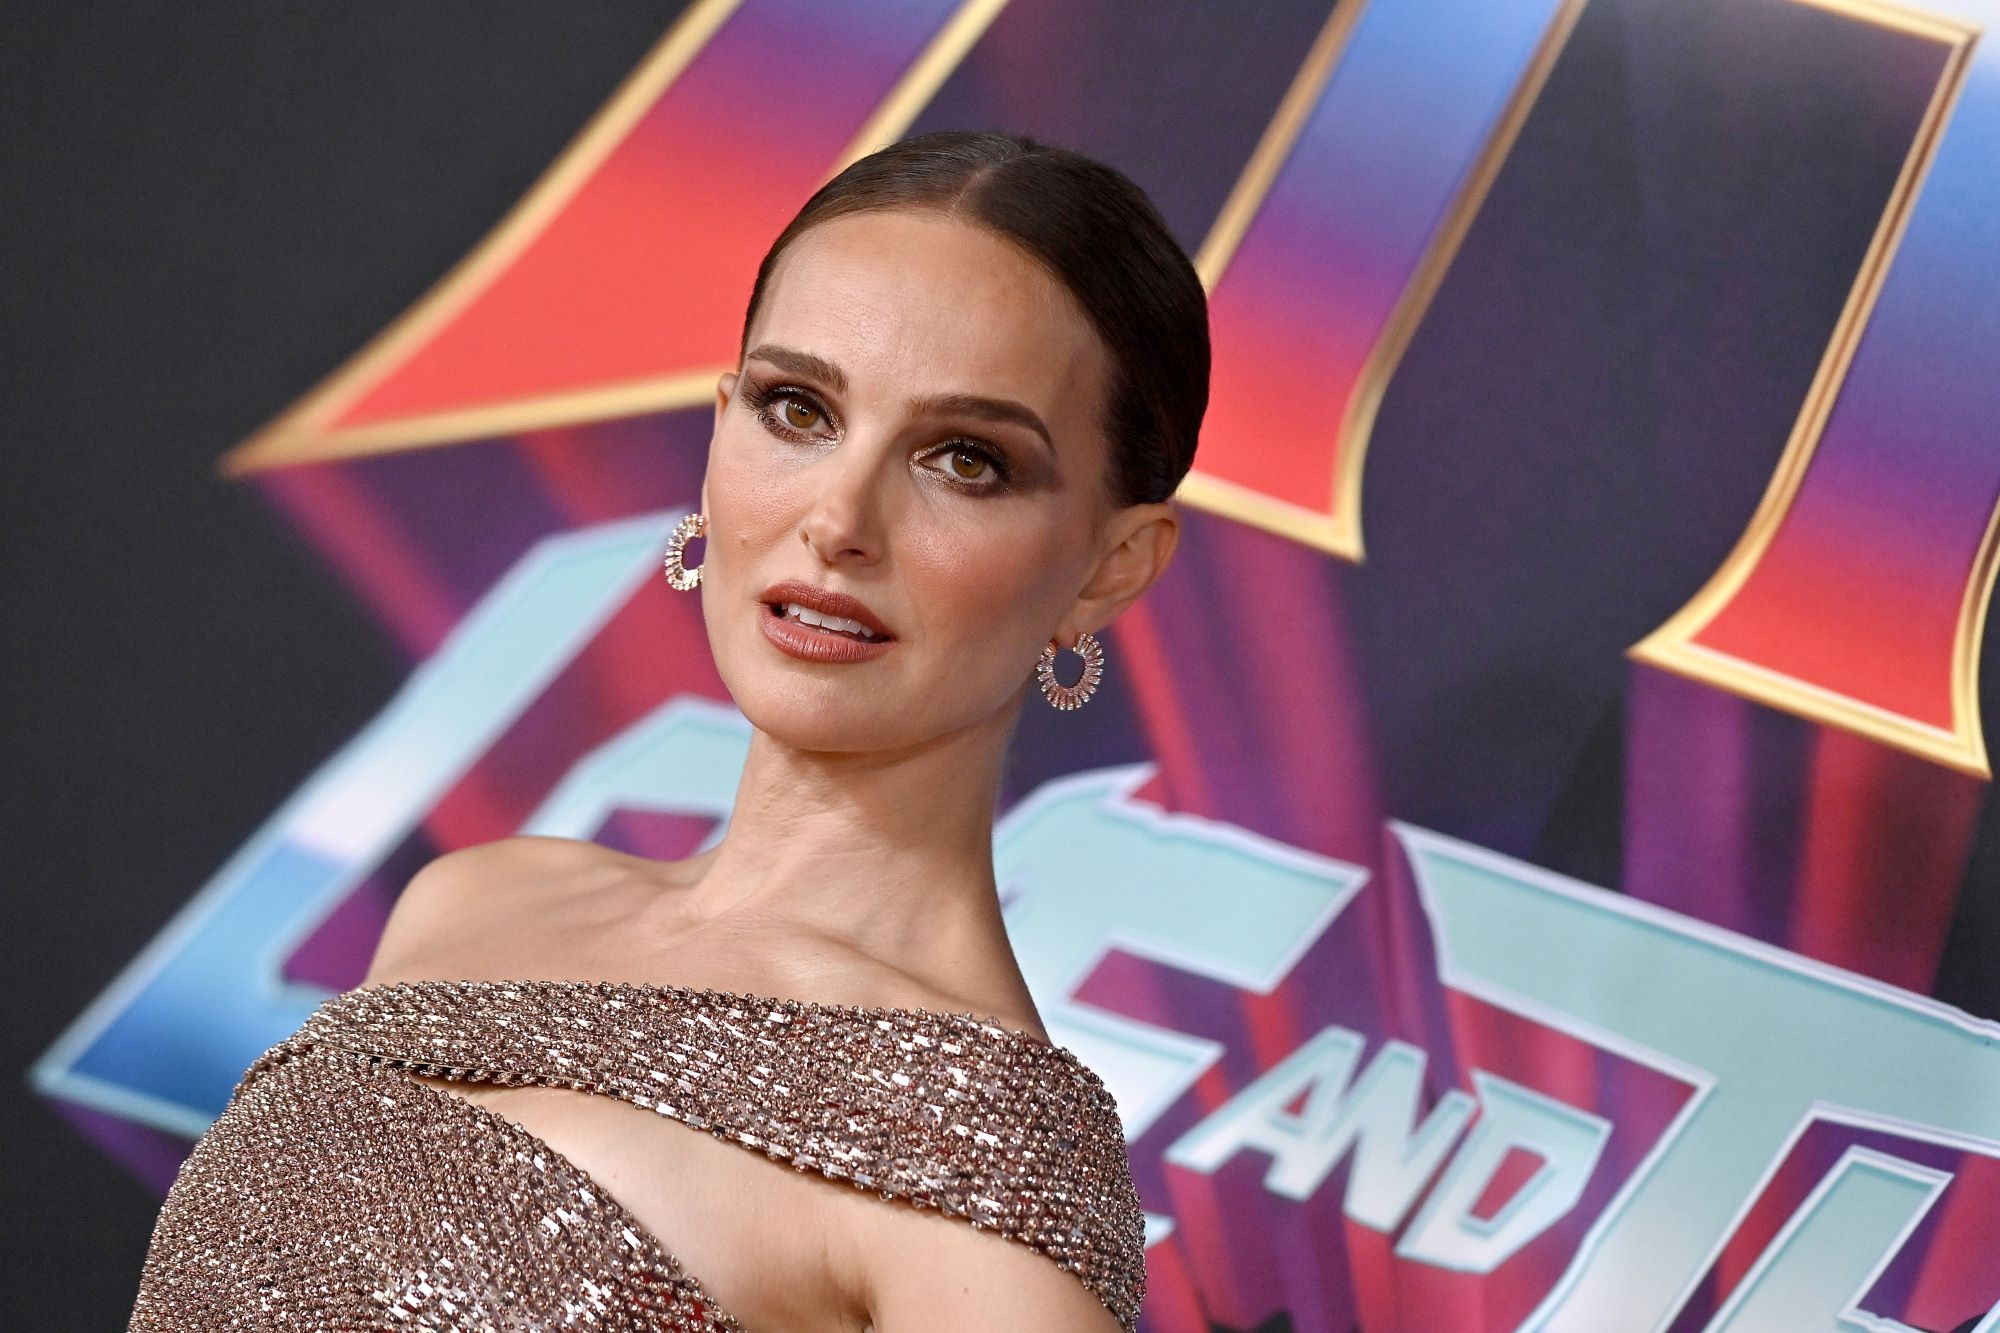 Natalie Portman, who may appear in a 'Thor: Love and Thunder' deleted scene, wears a beige sparkly one-shoulder dress.